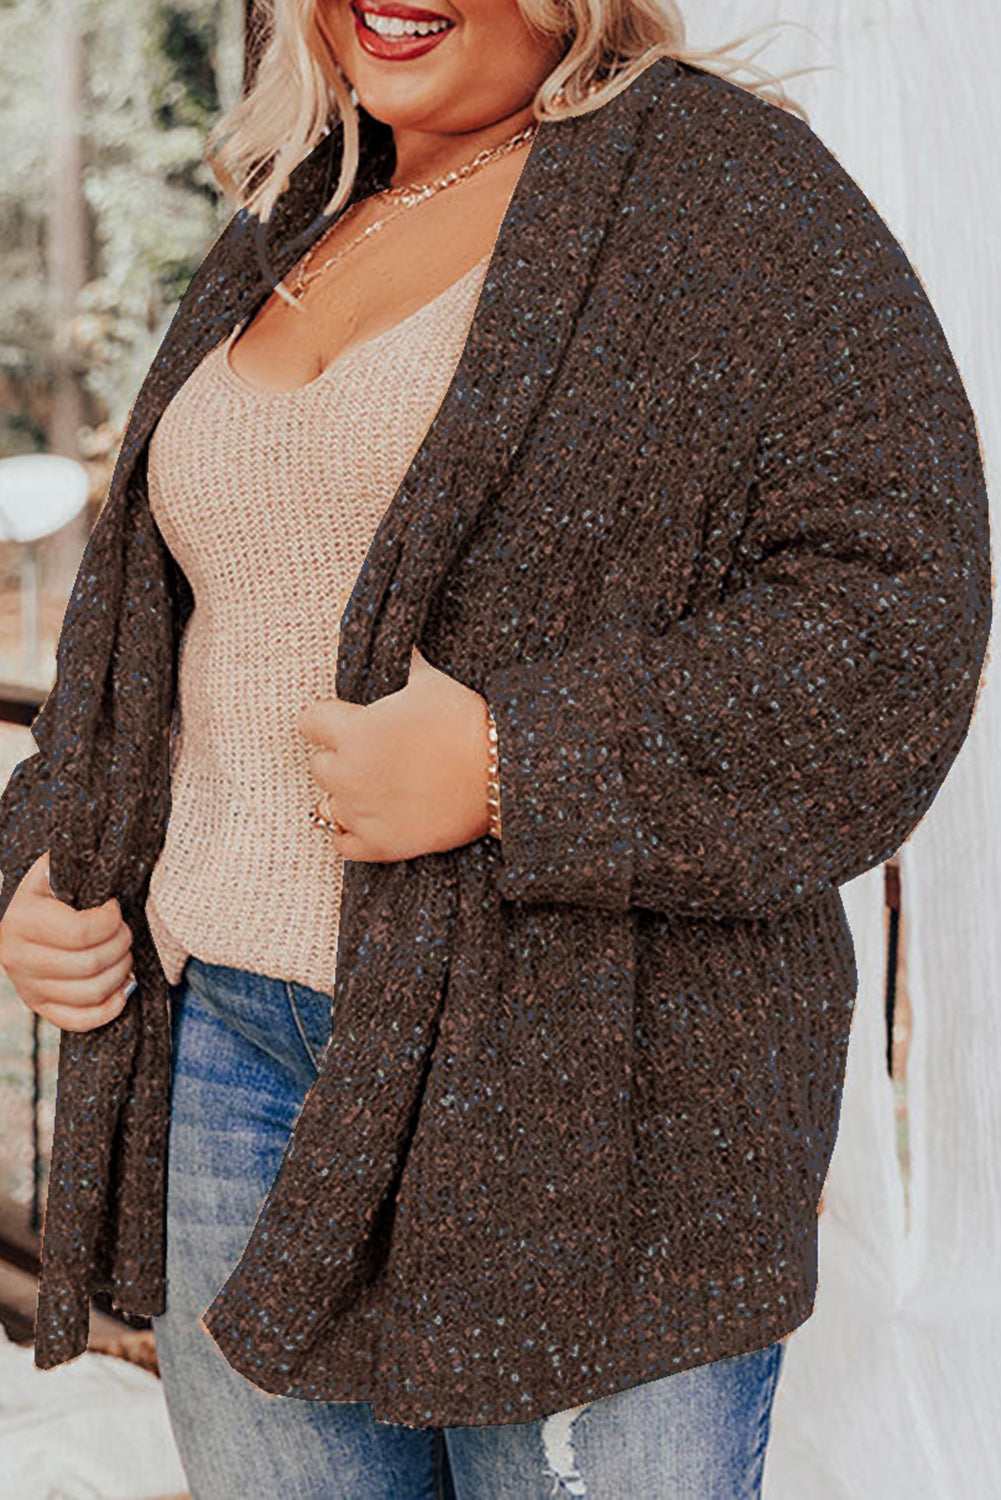 Chicory Coffee 100%Polyester - Bonbon Open Front Knit Voluptuous (+) Plus Size Cozy Cardigan - various colors - womens cardigan at TFC&H Co.